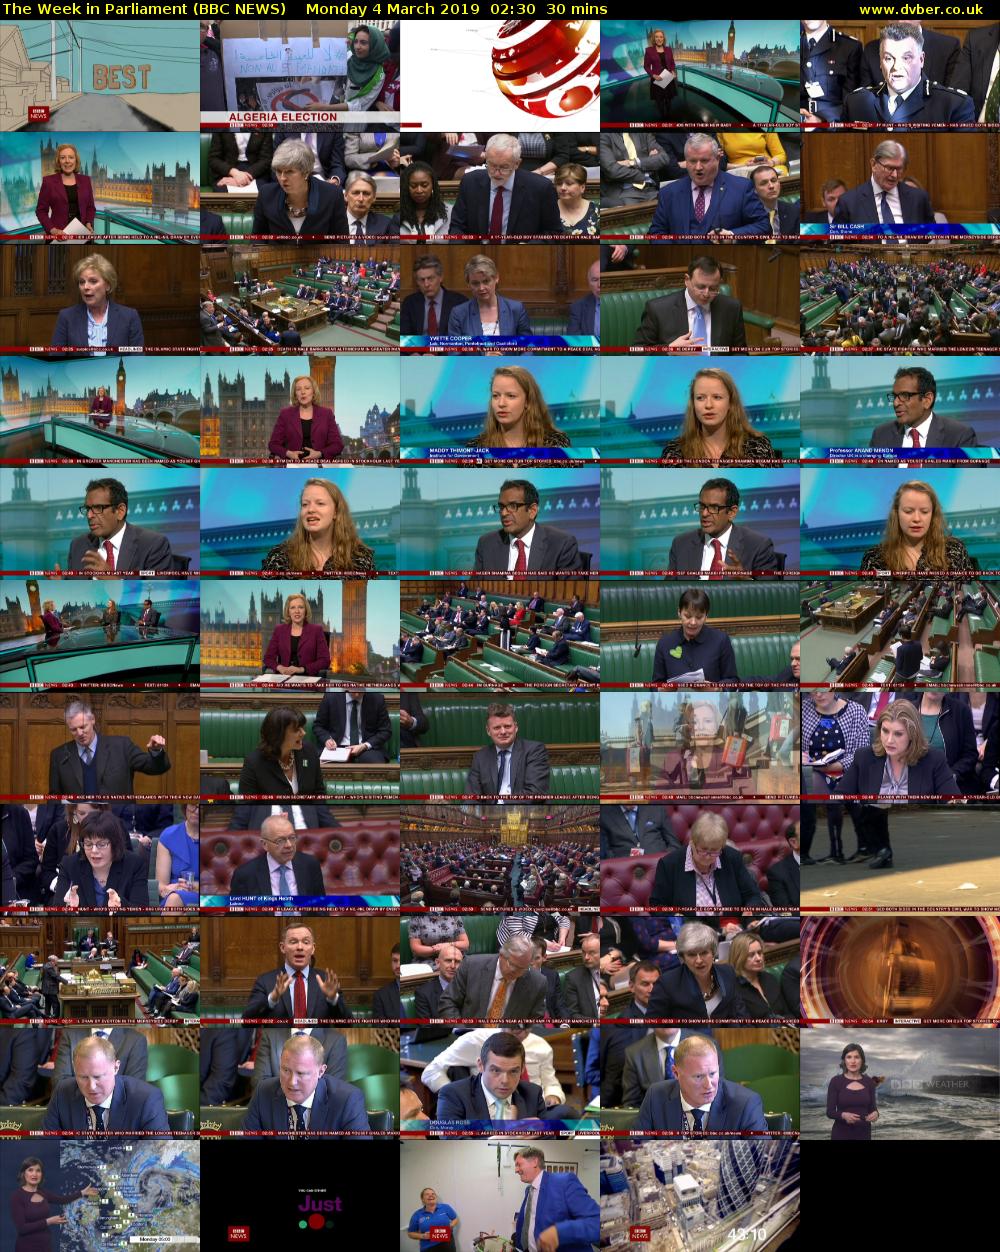 The Week in Parliament (BBC NEWS) Monday 4 March 2019 02:30 - 03:00